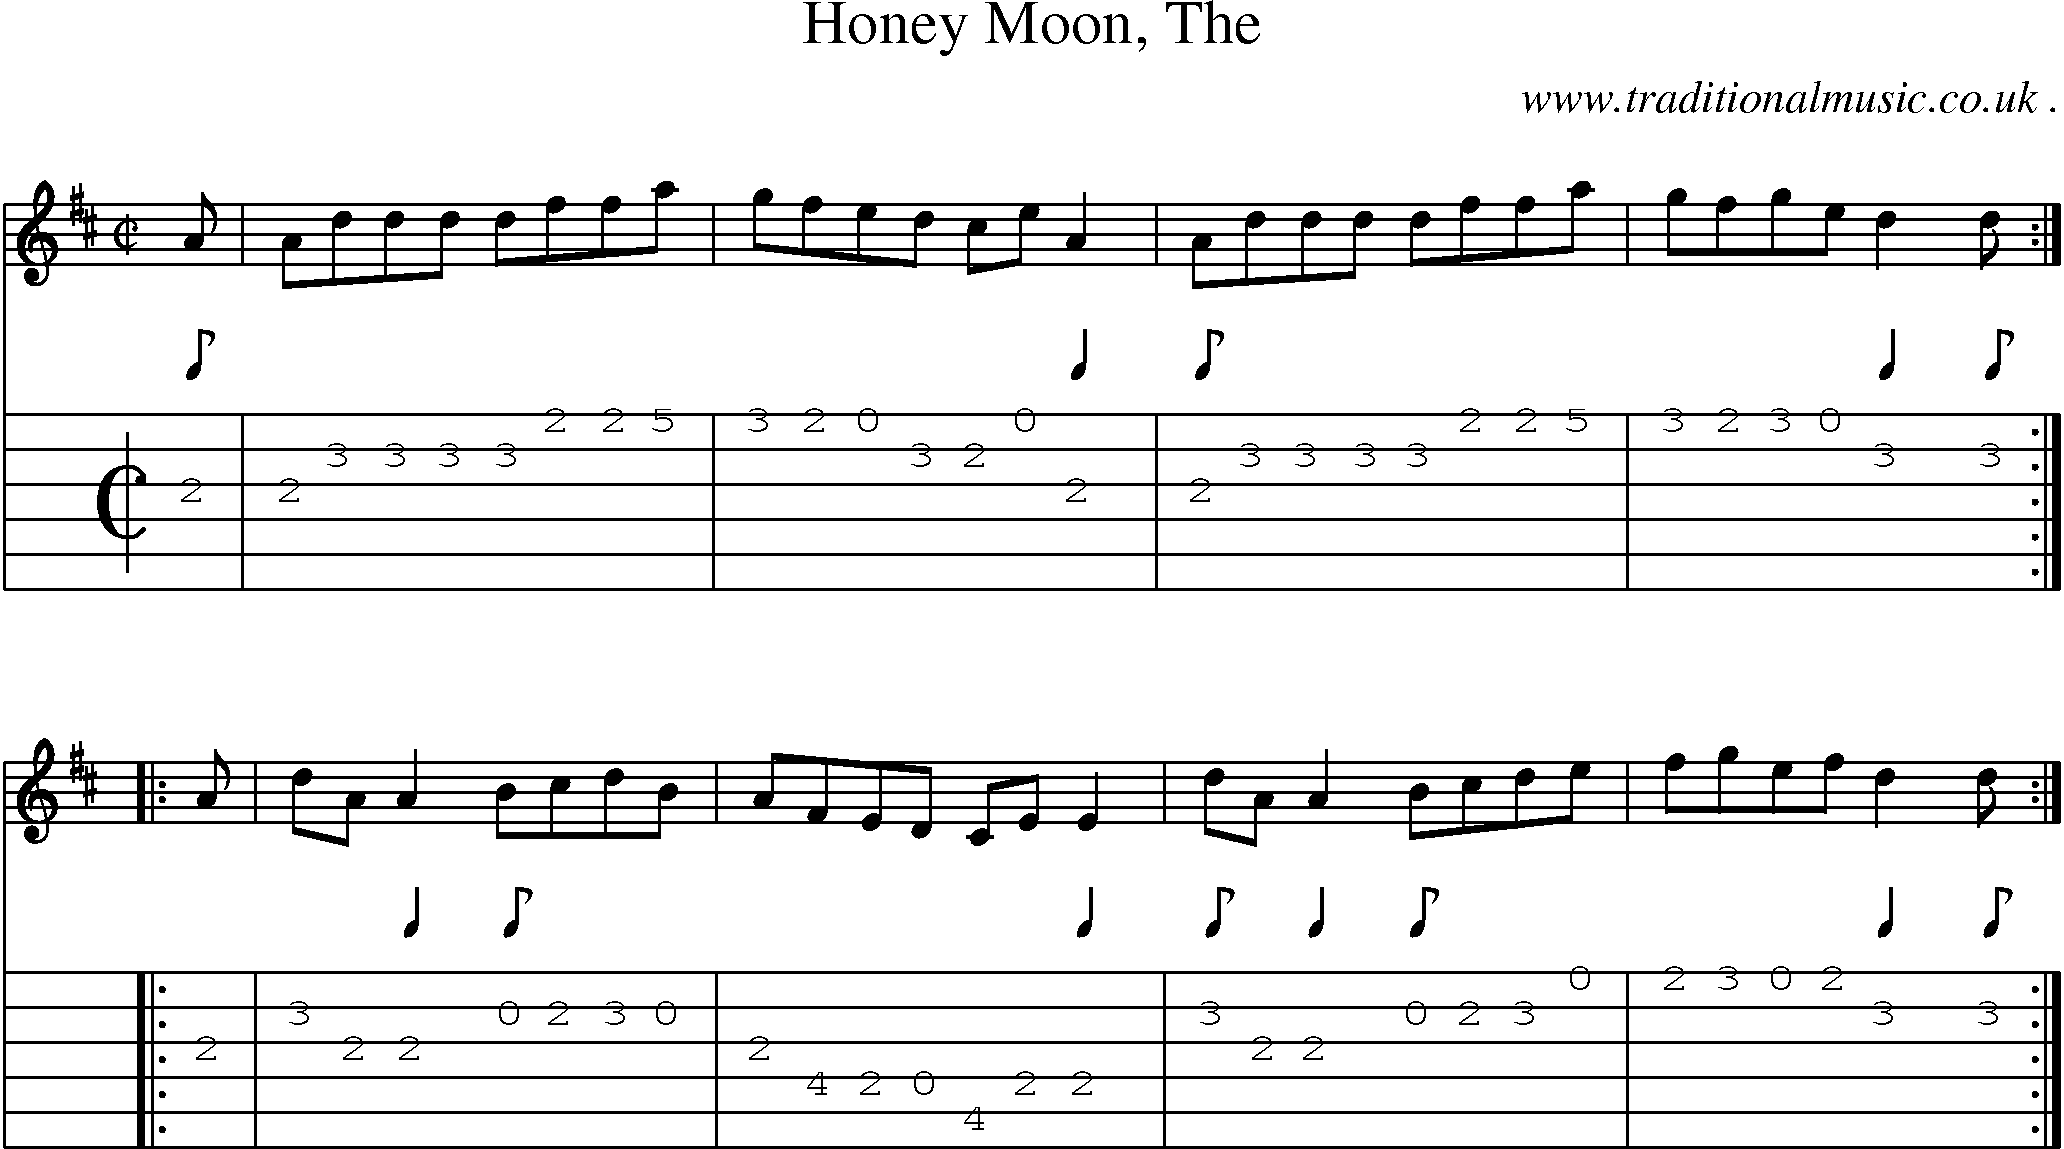 Sheet-music  score, Chords and Guitar Tabs for Honey Moon The